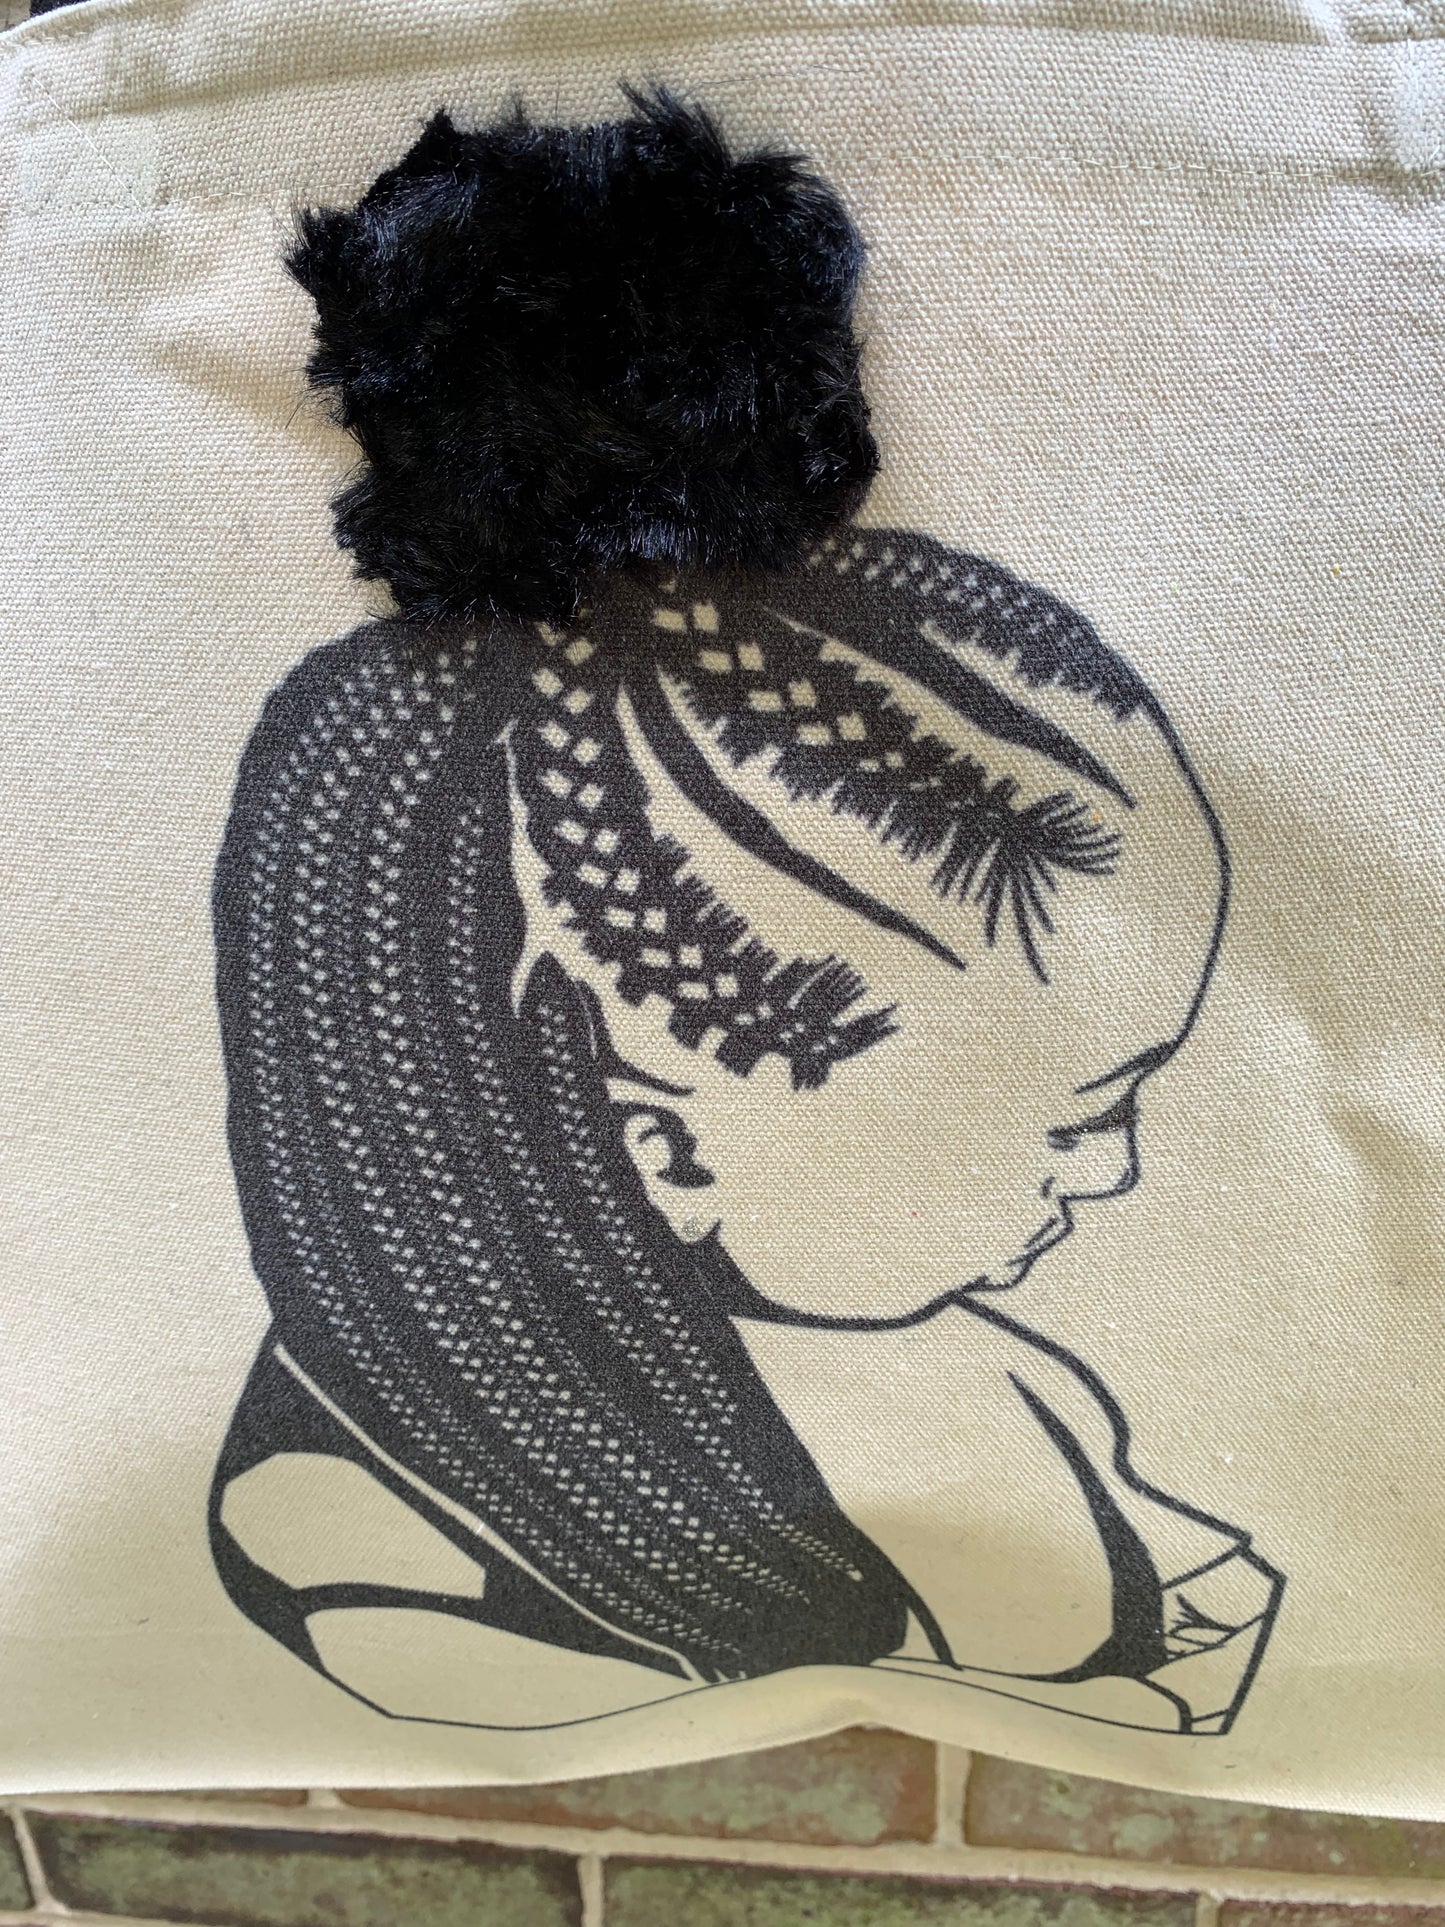 Textured Tote Bag, Corn Rows, Afro Puff, Afro American Woman, Canvas Bag